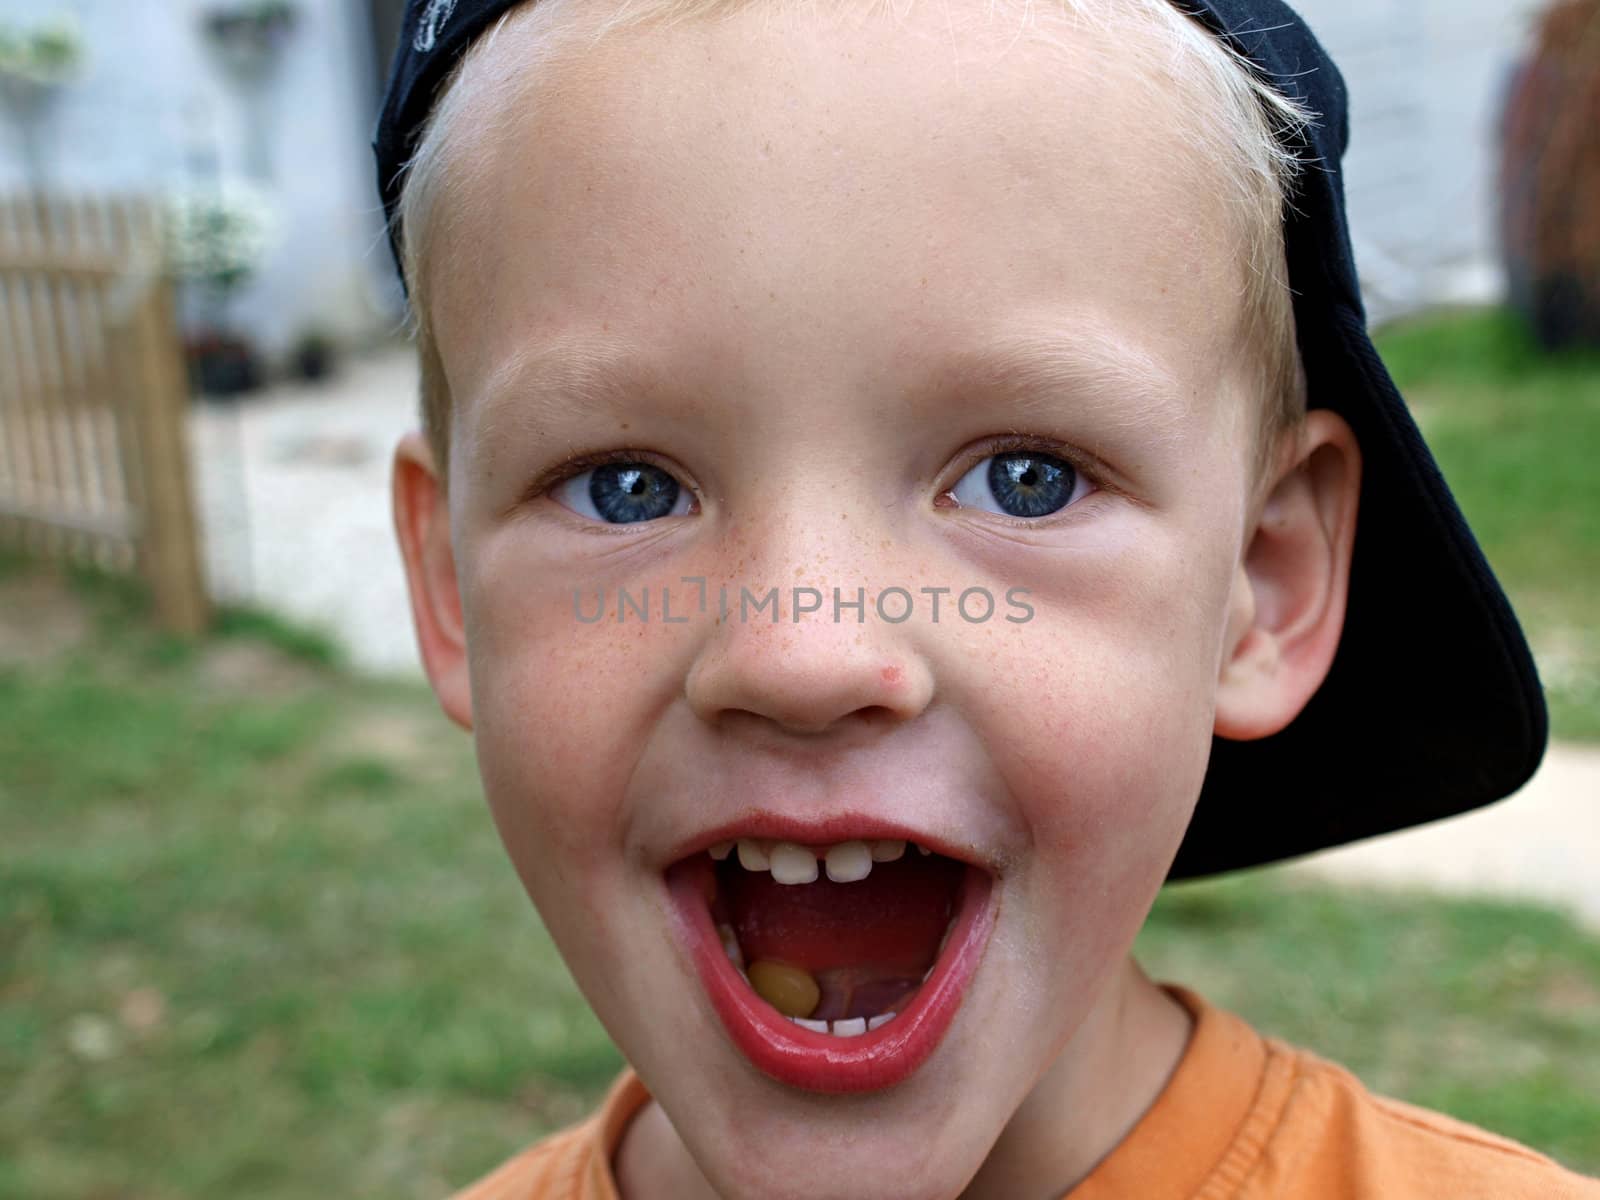 Cute happy smiling young boy - All OK by Ronyzmbow